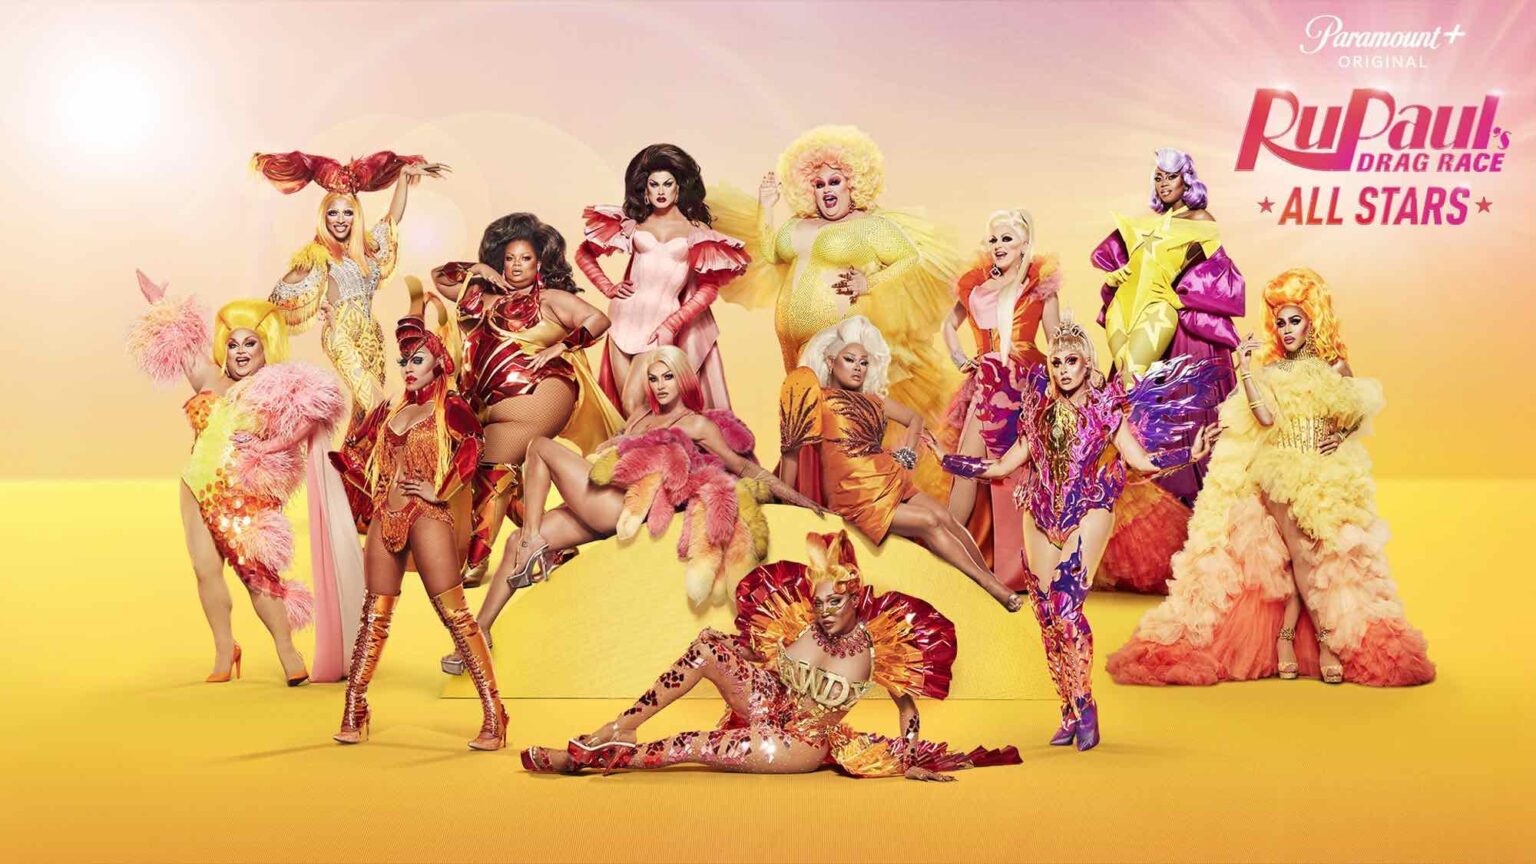 Ready to meet the queens for 'RuPaul's Drag Race All Stars' season 6? Put on some shades because these queens are shining like the sun.